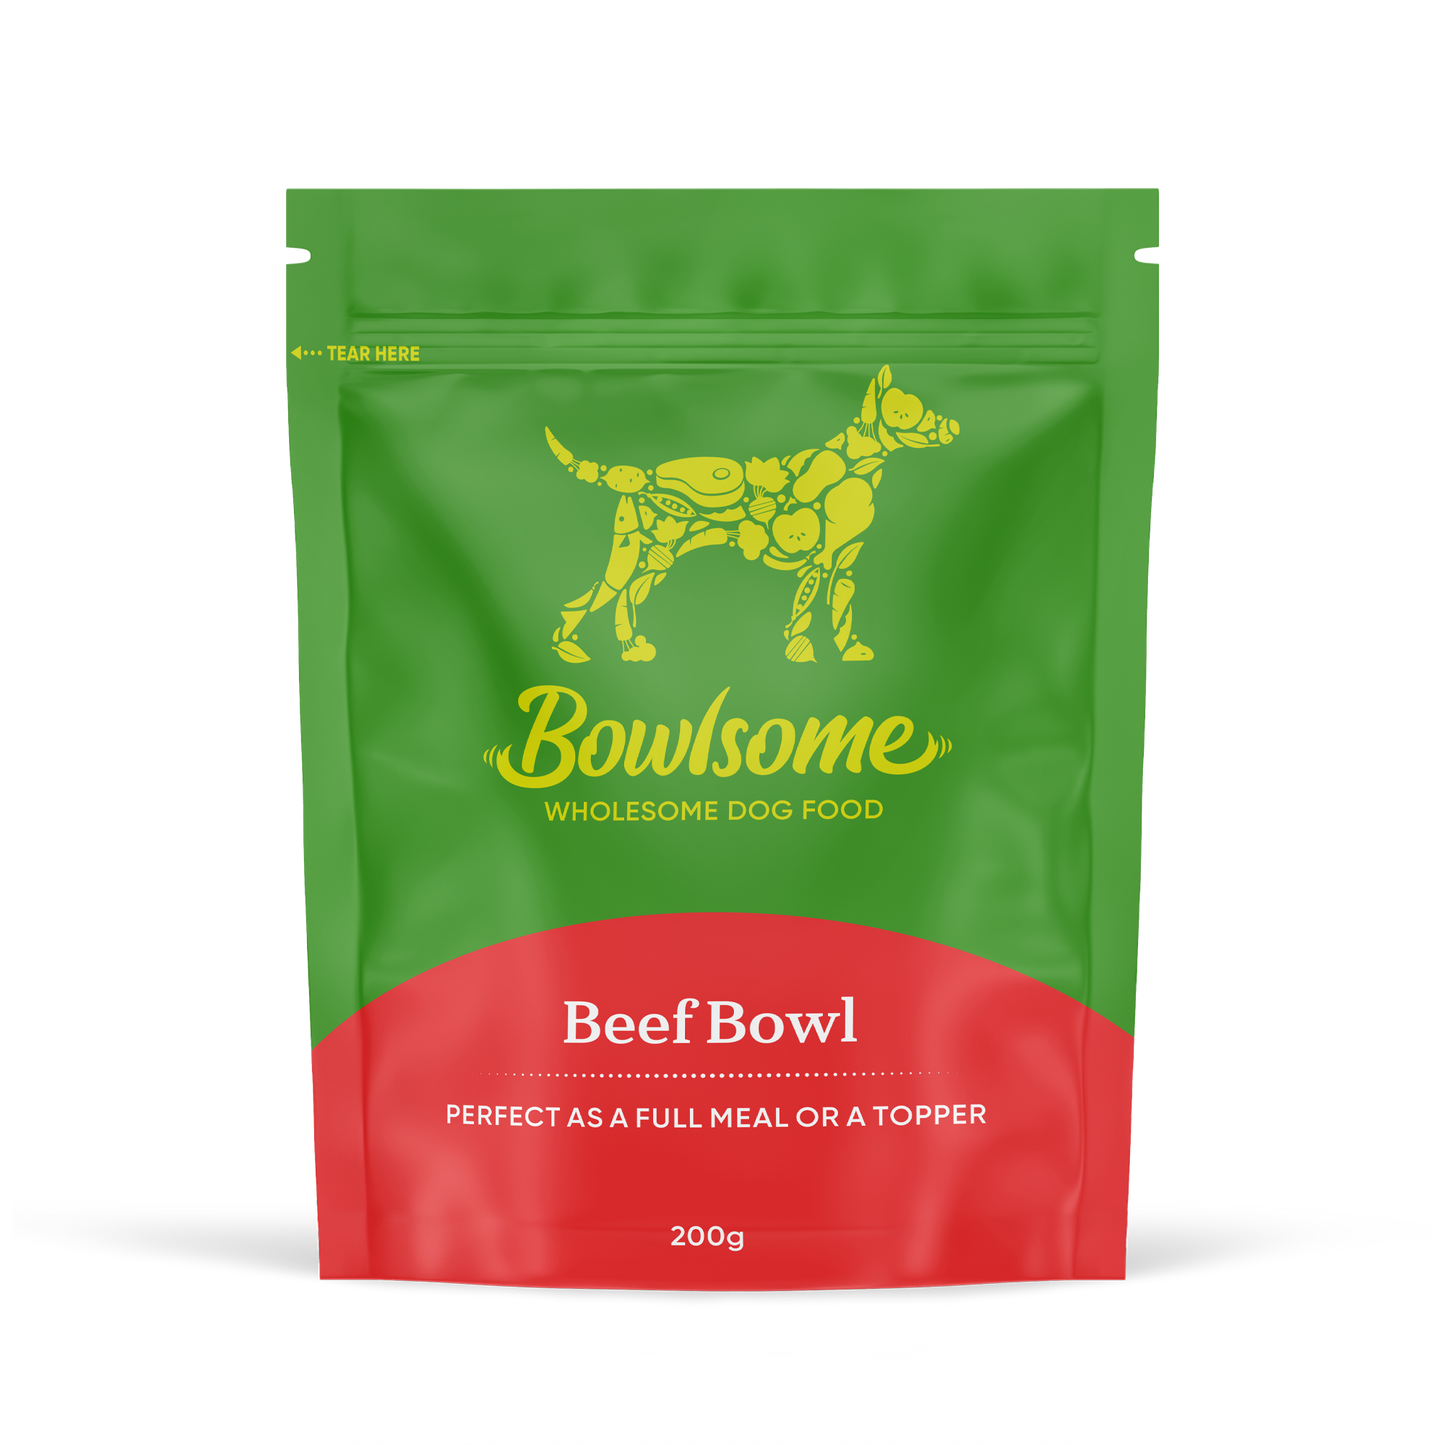 Pouch of dog food that reads "Bowlsome - Wholesome Dog Food, Beef Bowl"